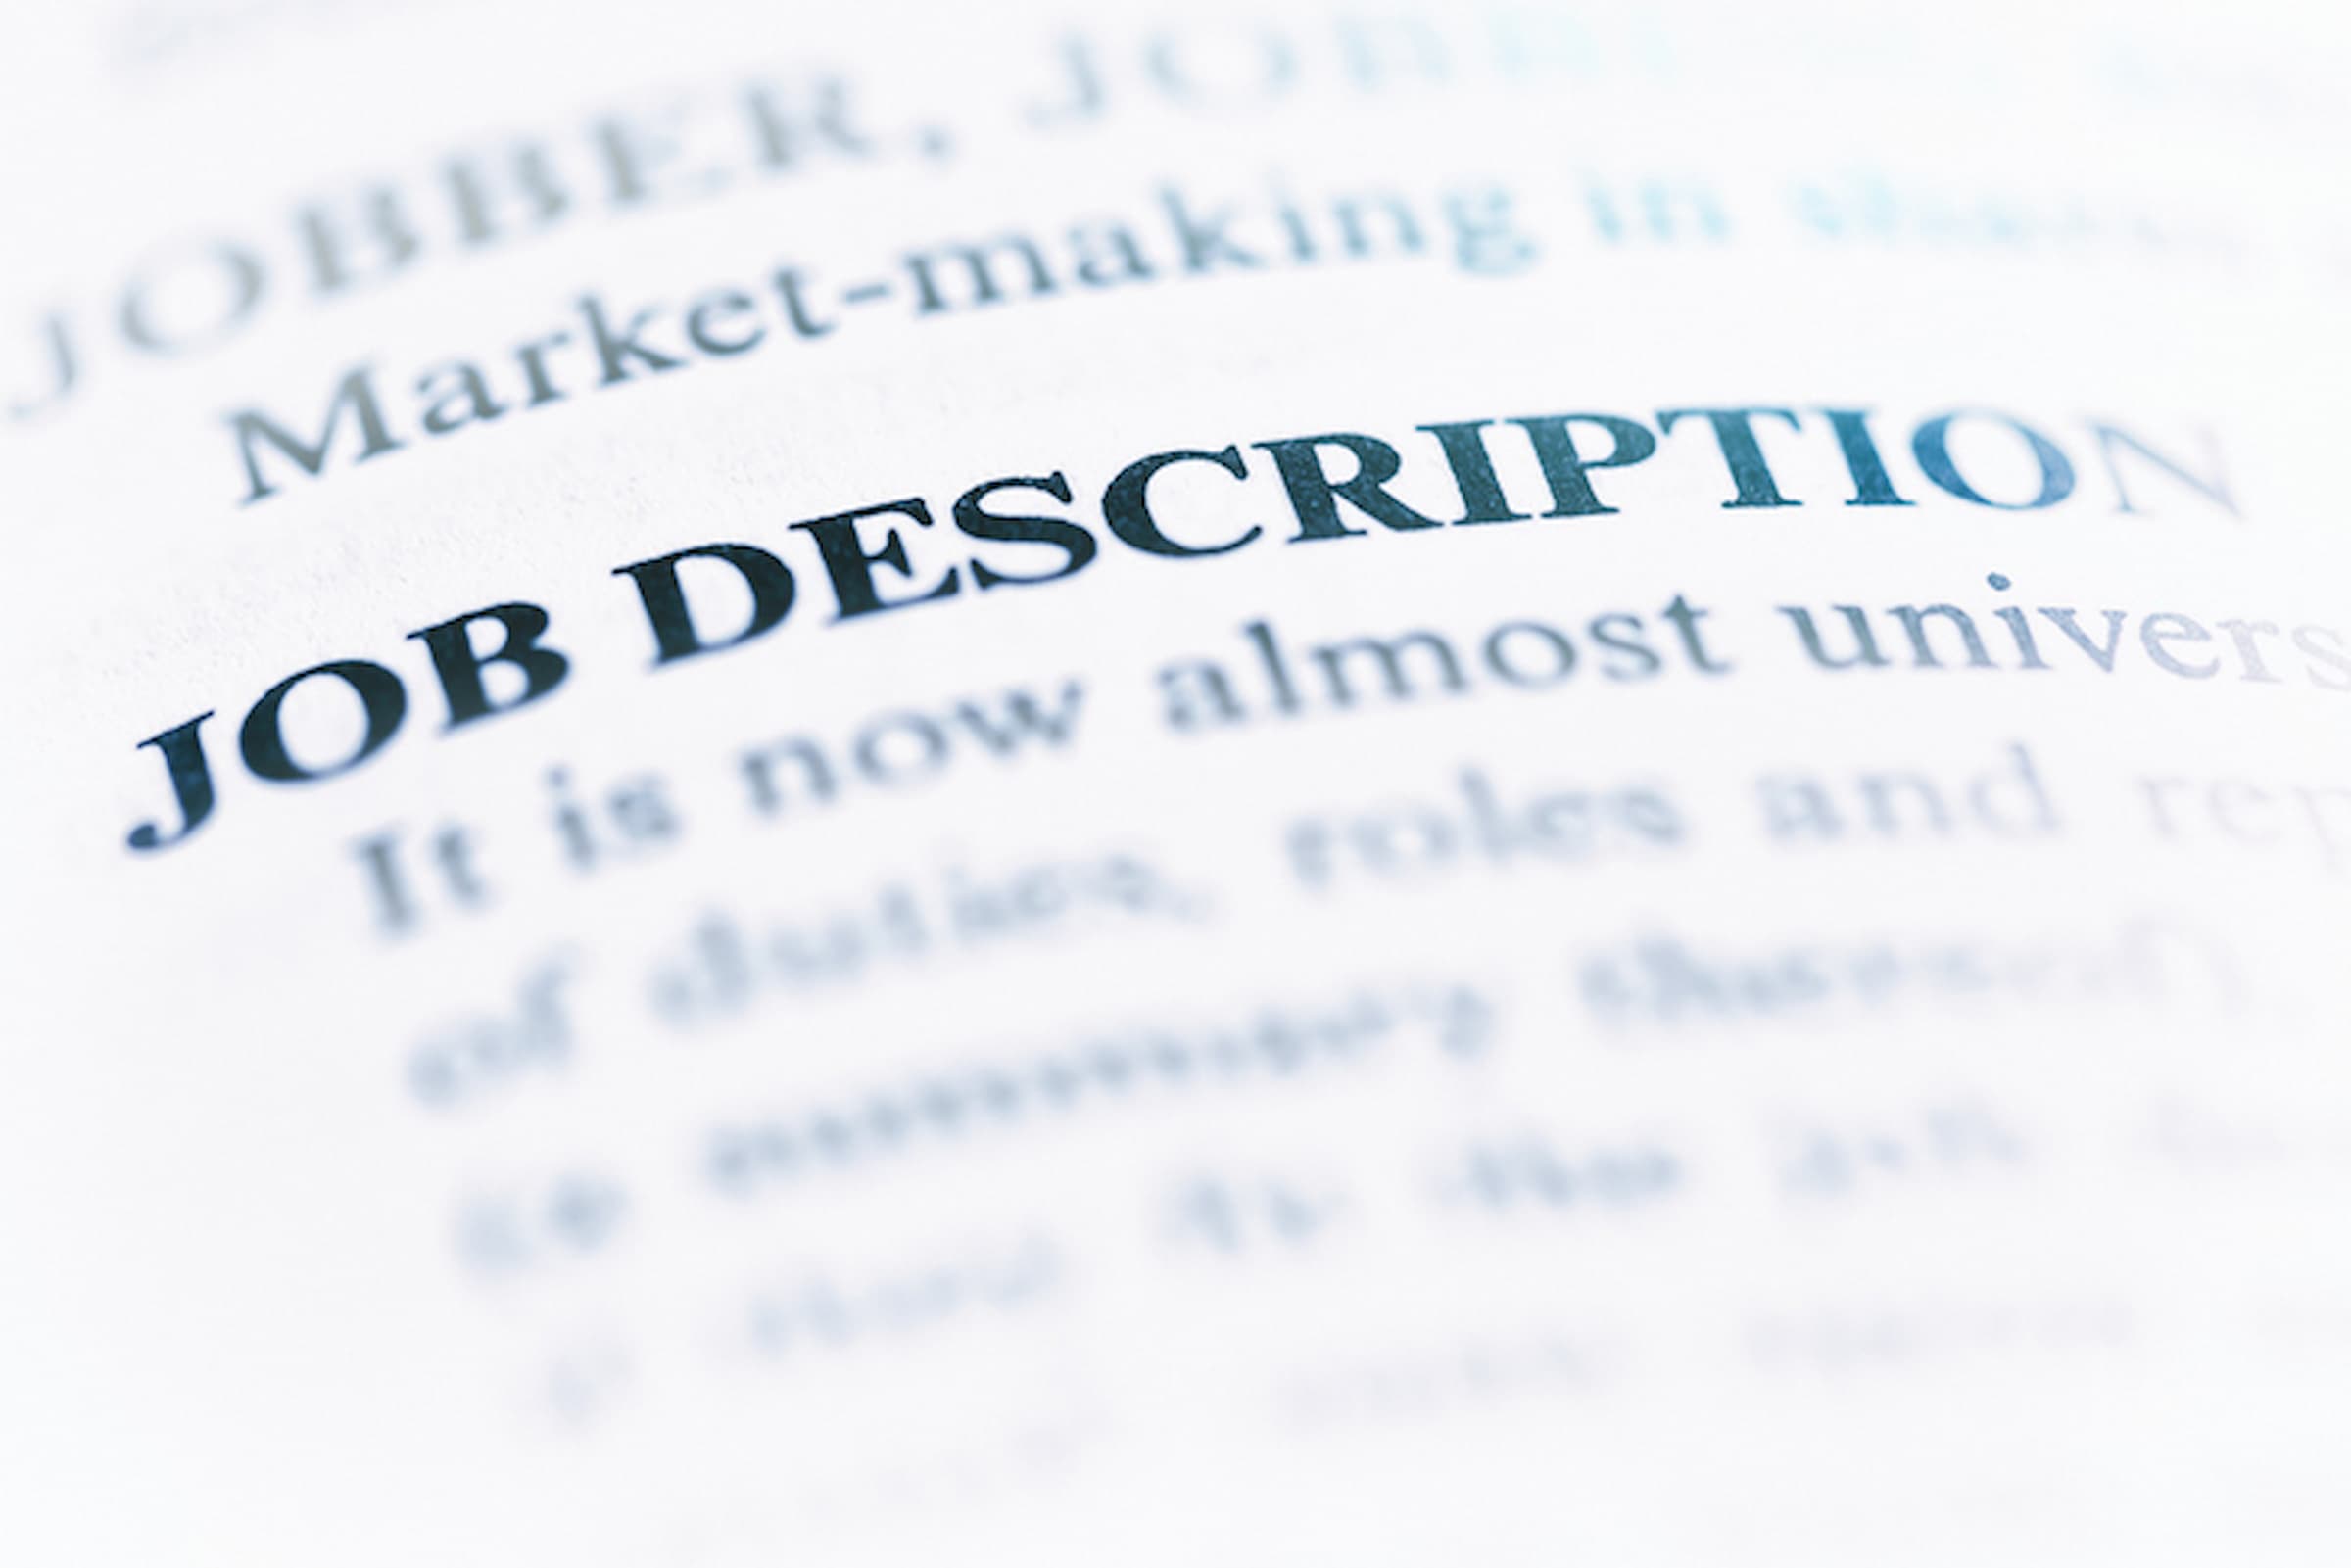 Template: Writing a Job Description to Attract the Best Talent